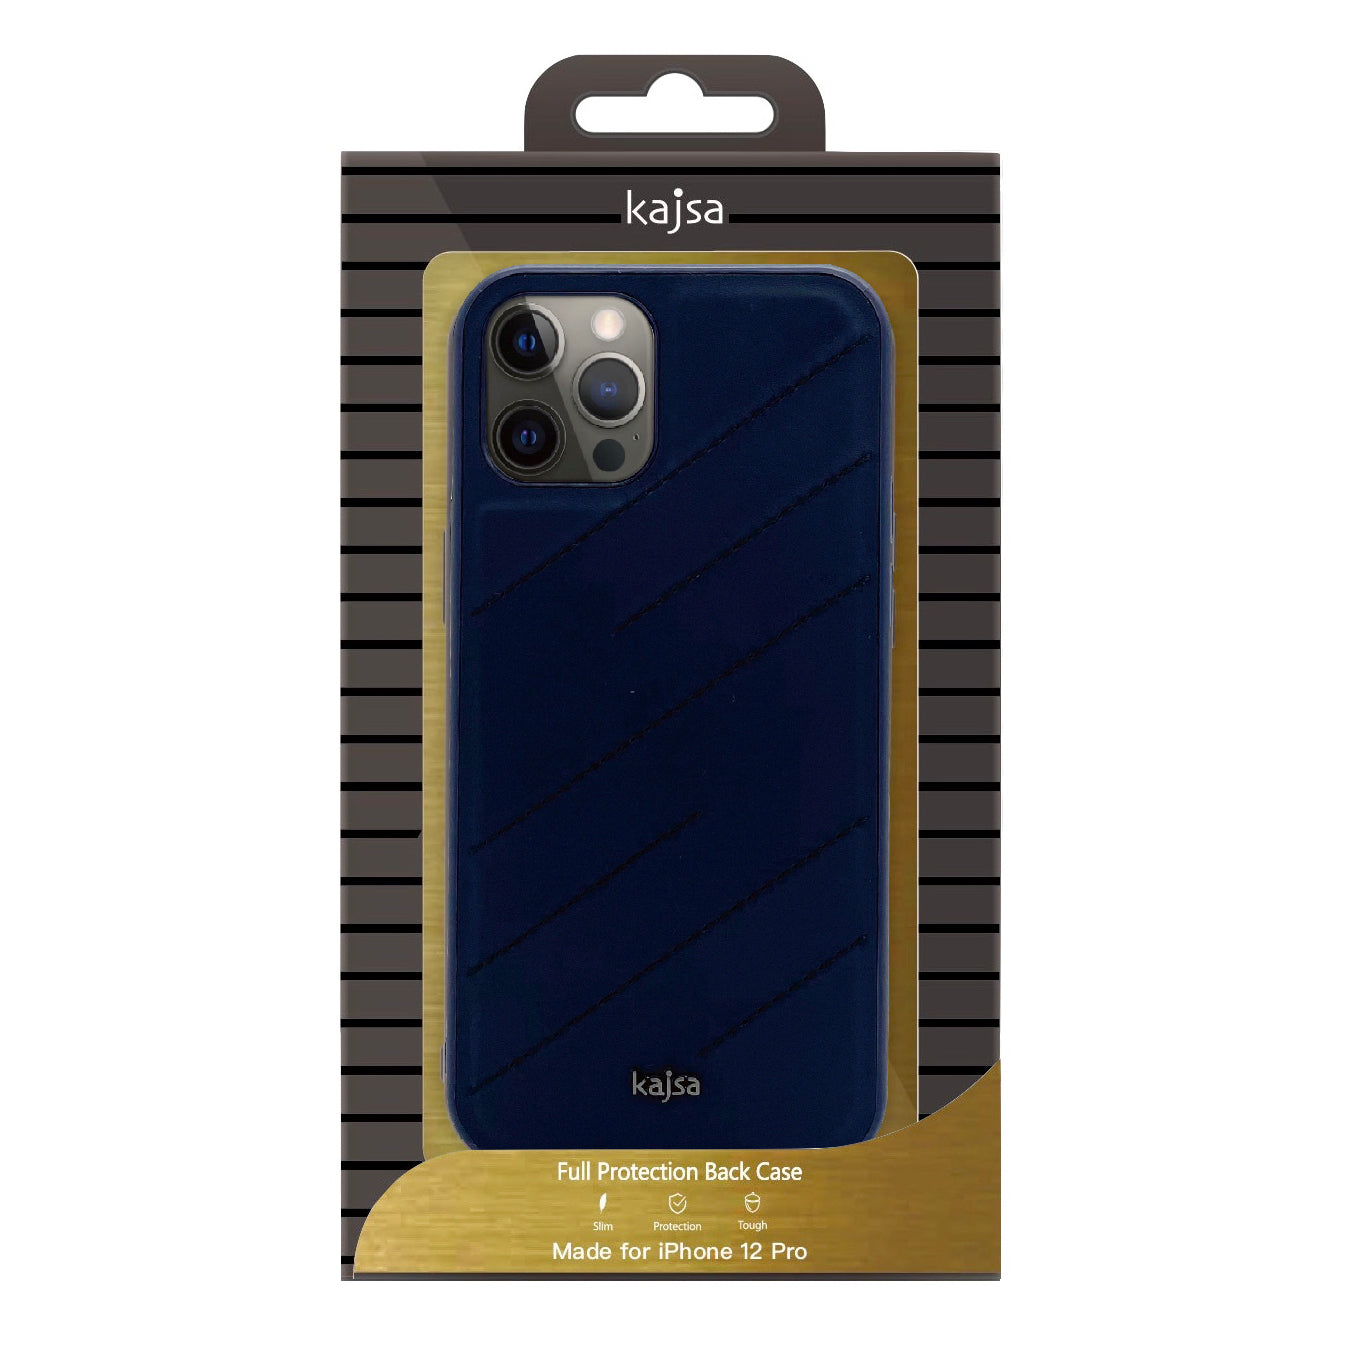 Dale Collection - Double Line II Back Case for iPhone 12-Phone Case- phone case - phone cases- phone cover- iphone cover- iphone case- iphone cases- leather case- leather cases- DIYCASE - custom case - leather cover - hand strap case - croco pattern case - snake pattern case - carbon fiber phone case - phone case brand - unique phone case - high quality - phone case brand - protective case - buy phone case hong kong - online buy phone case - iphone‎手機殼 - 客製化手機殼 - samsung ‎手機殼 - 香港手機殼 - 買電話殼